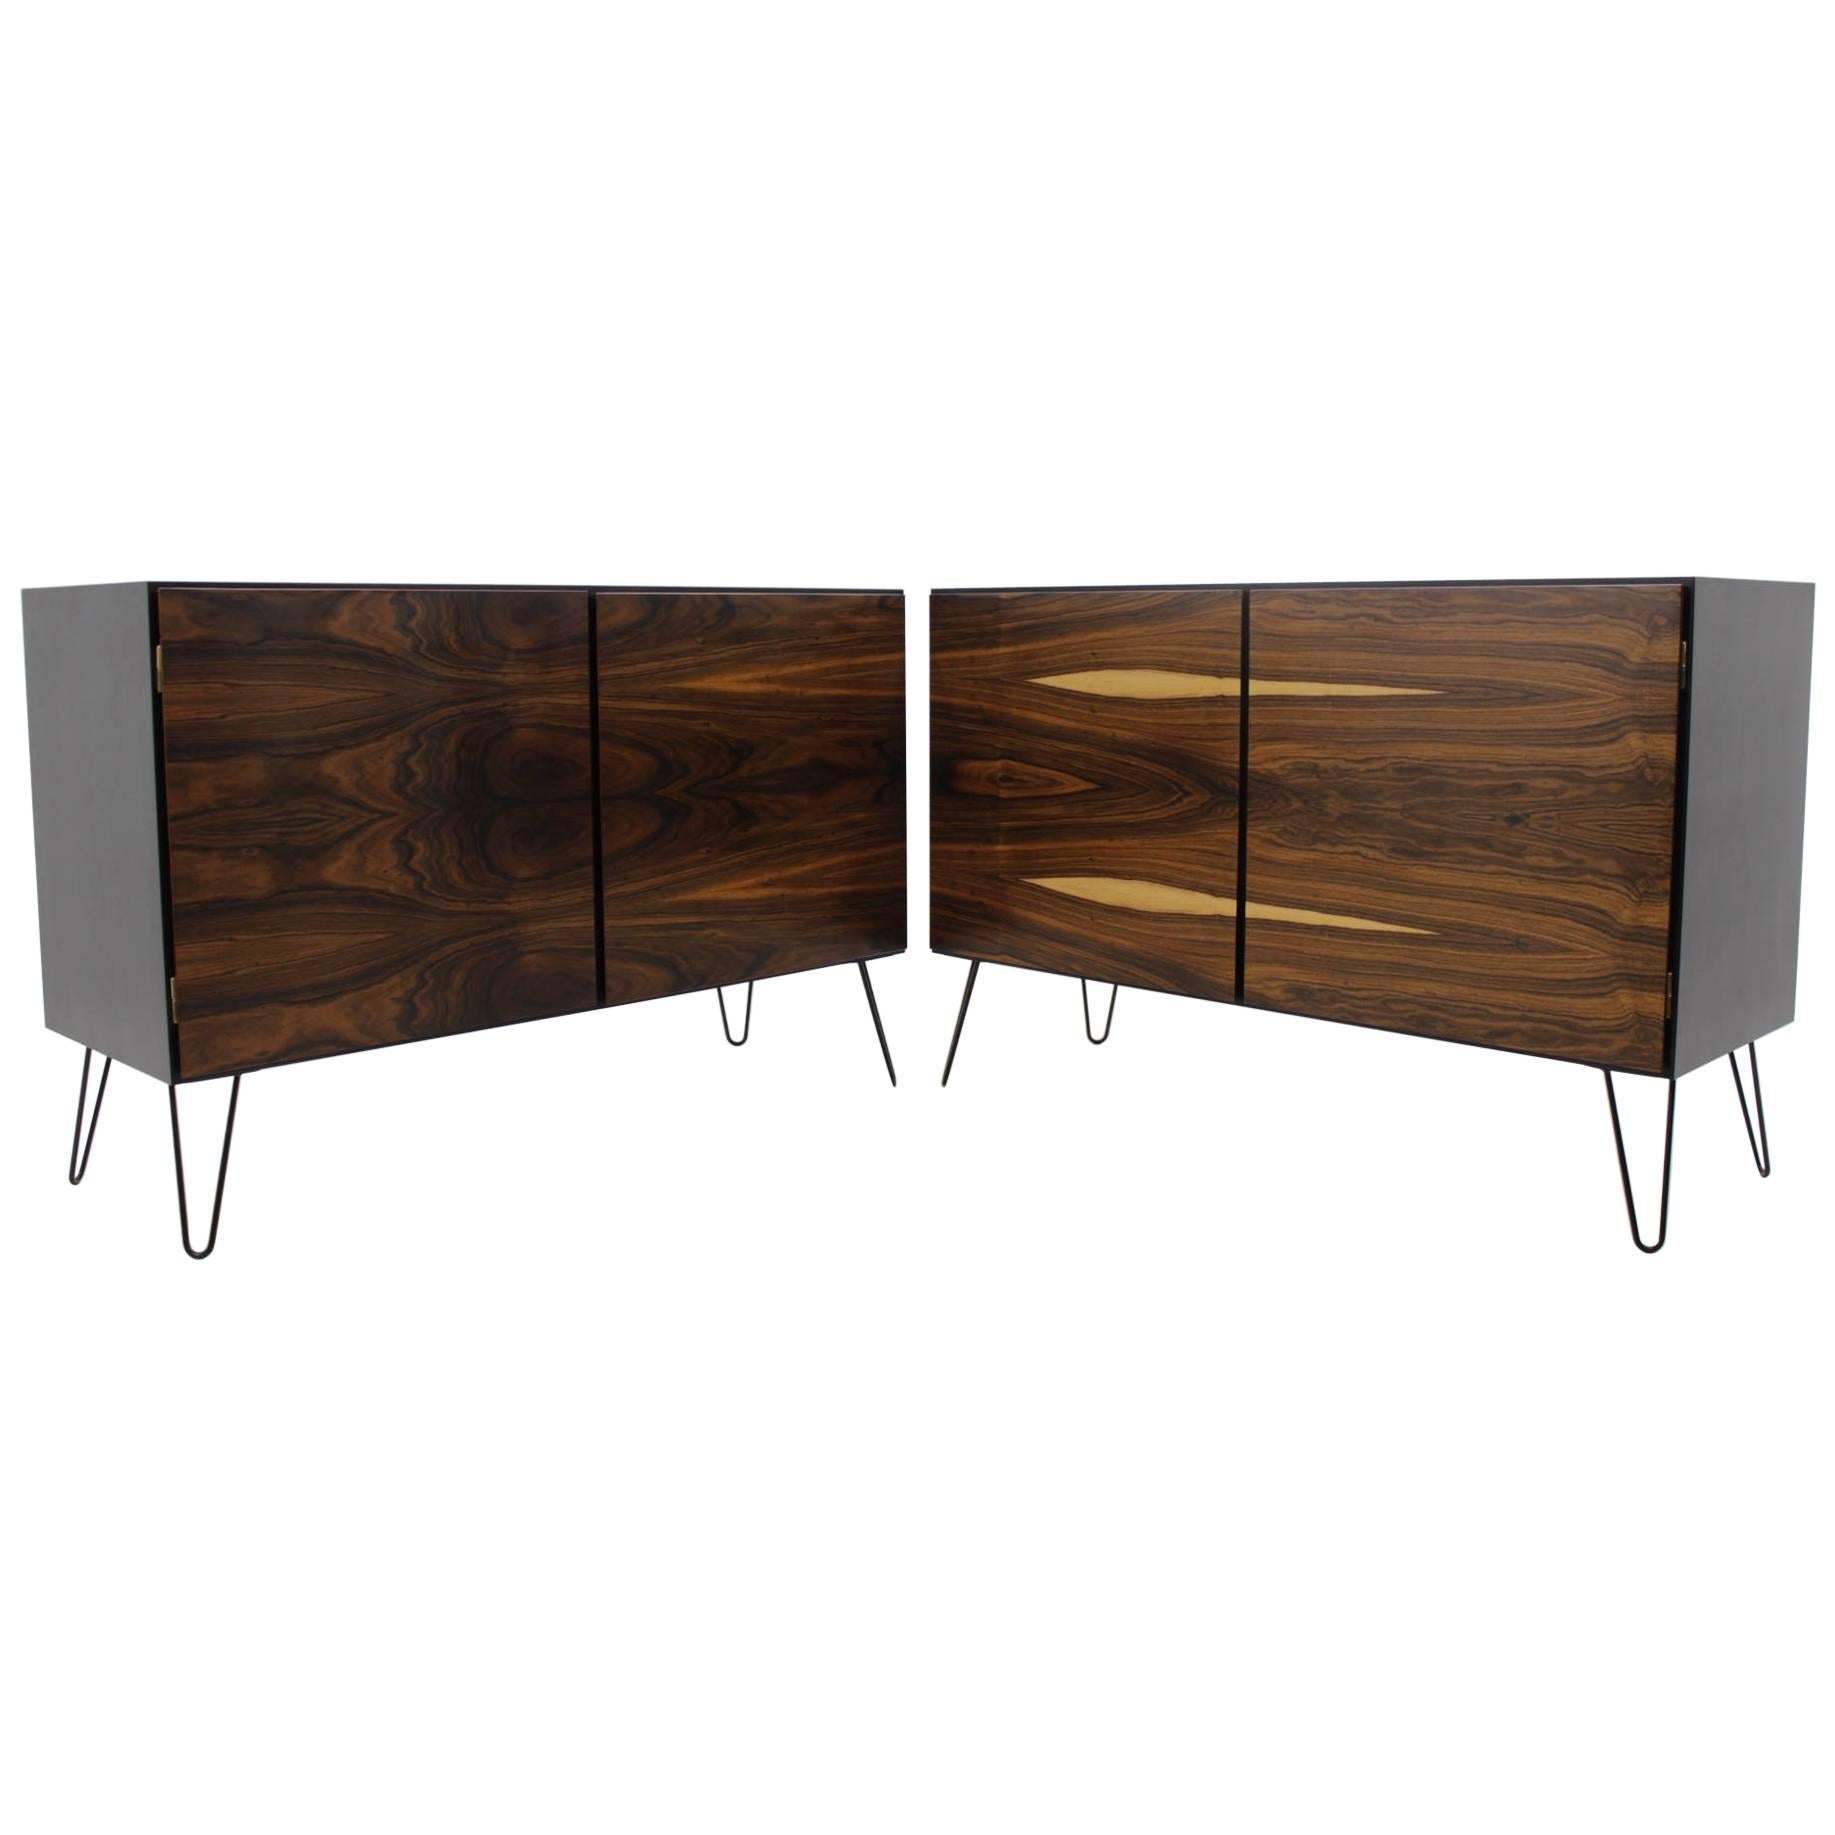 Set of Two Upcycled Palisander Sideboards by Omann Jun